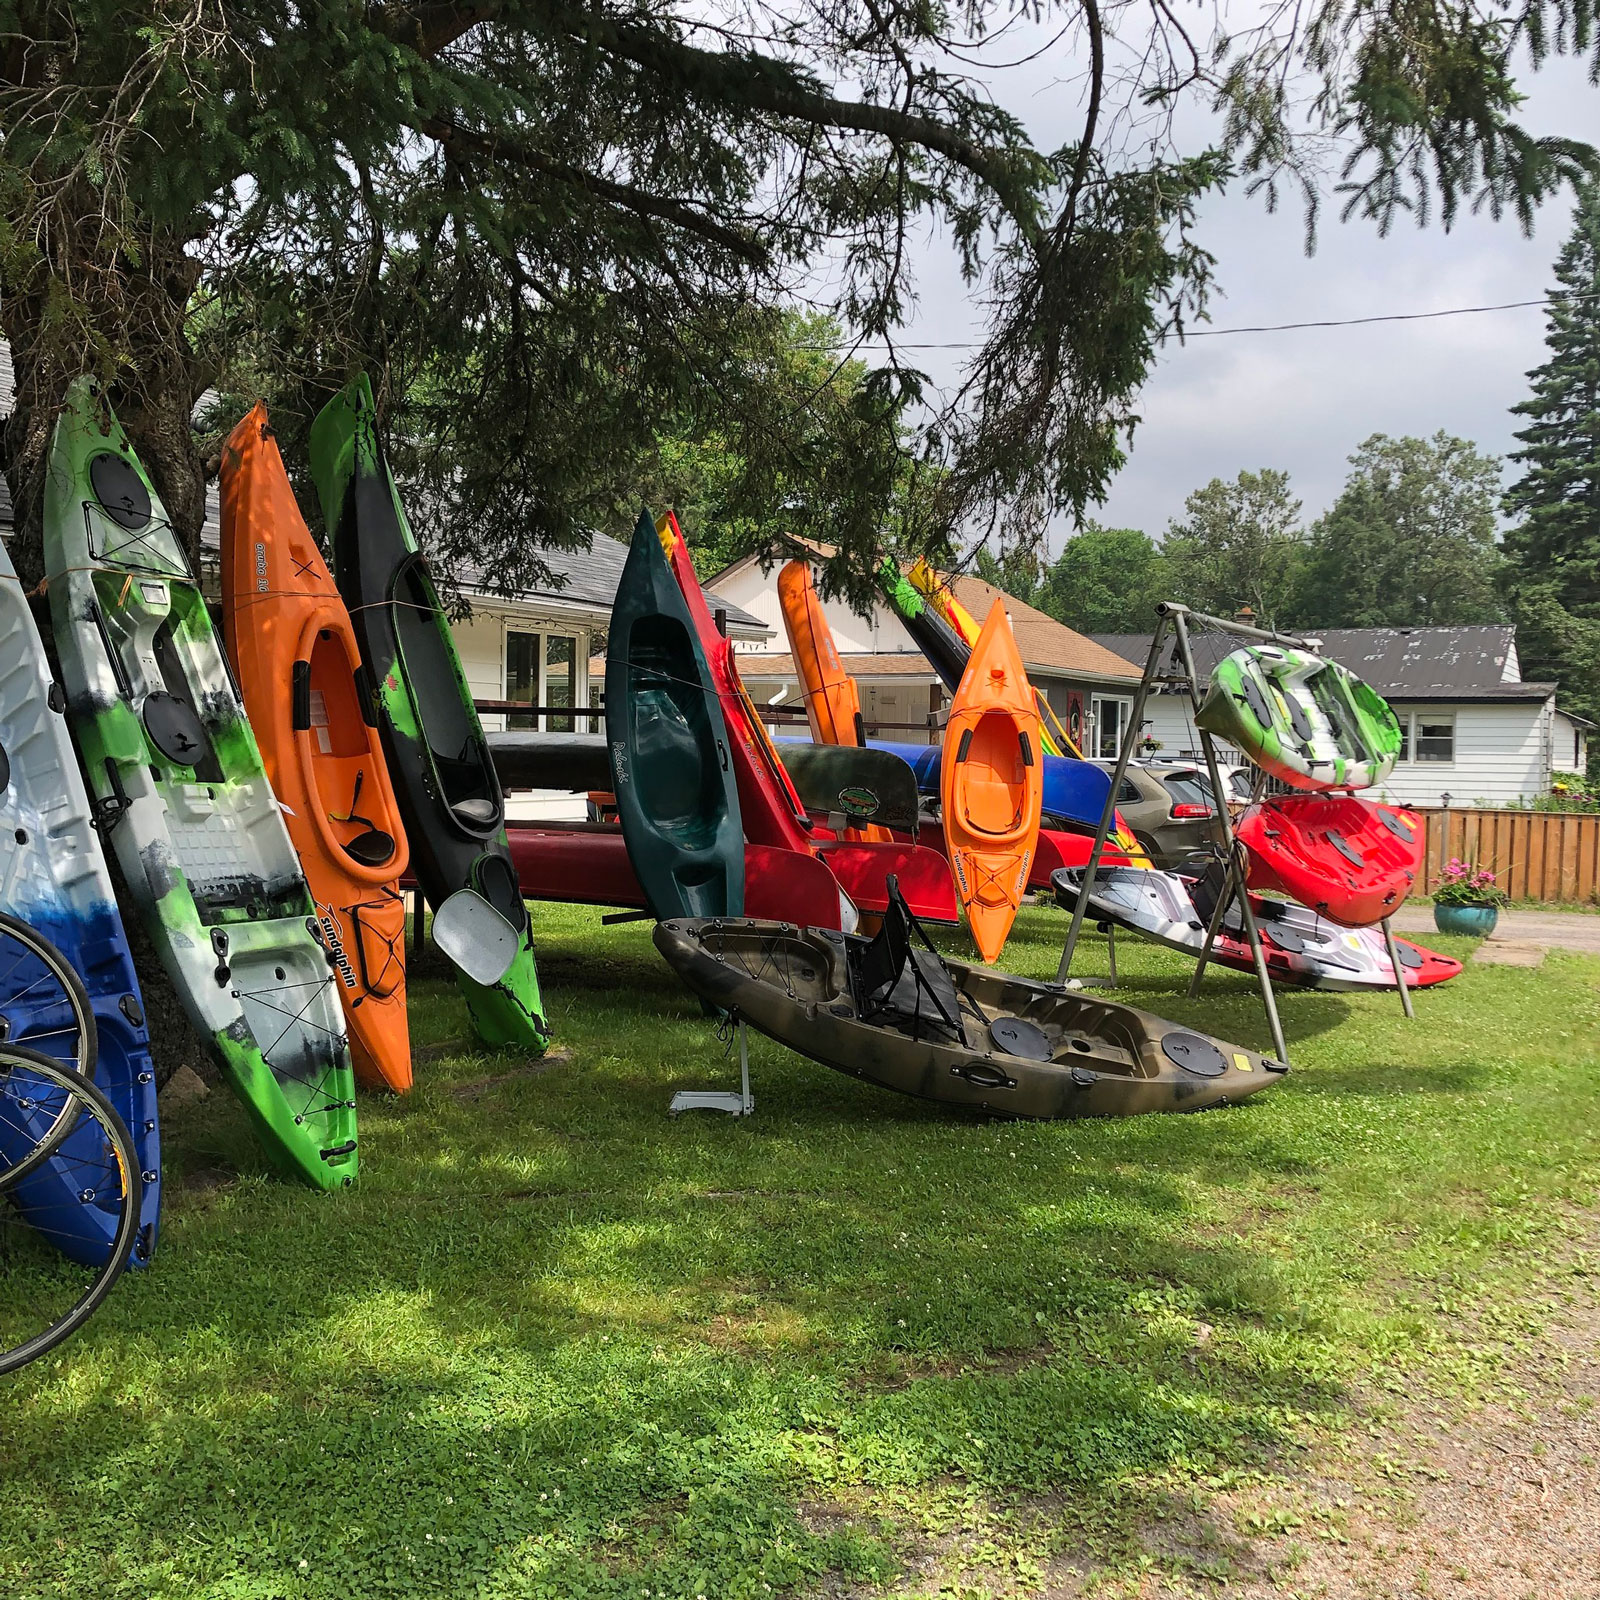 Several kayaks leaning upright in front of a store in Bancroft on a grass lawn